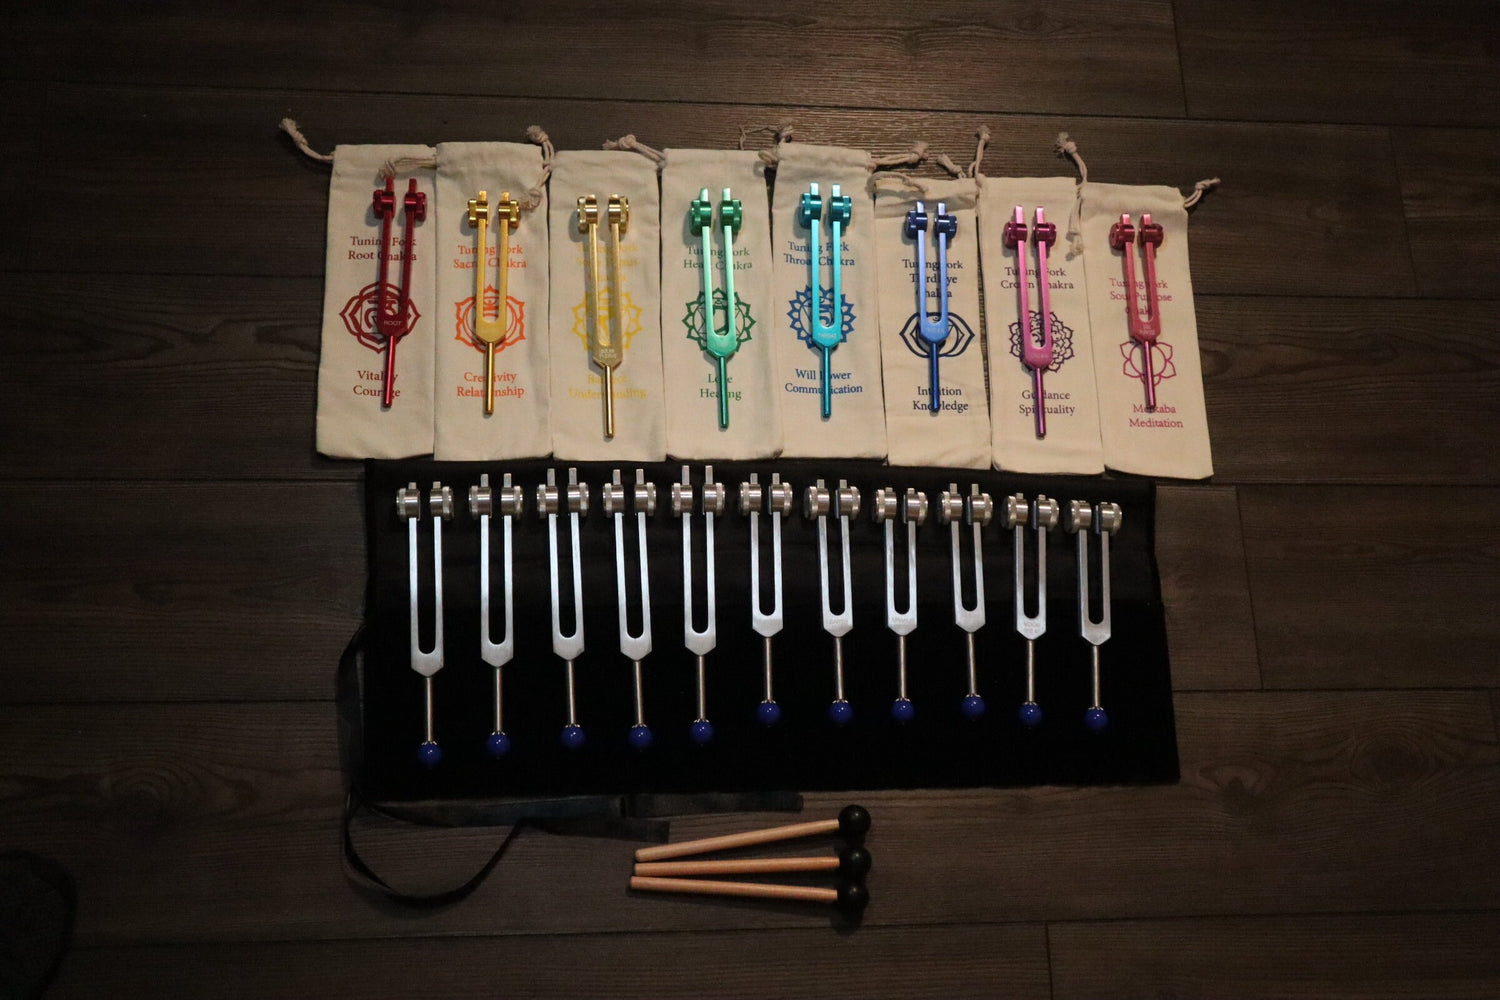 19pc Chakra and Planetary Tuning Fork - Professionally Tuned .25 - Weighted, Astrology, Chakras, Sound Vibration, Bio-field